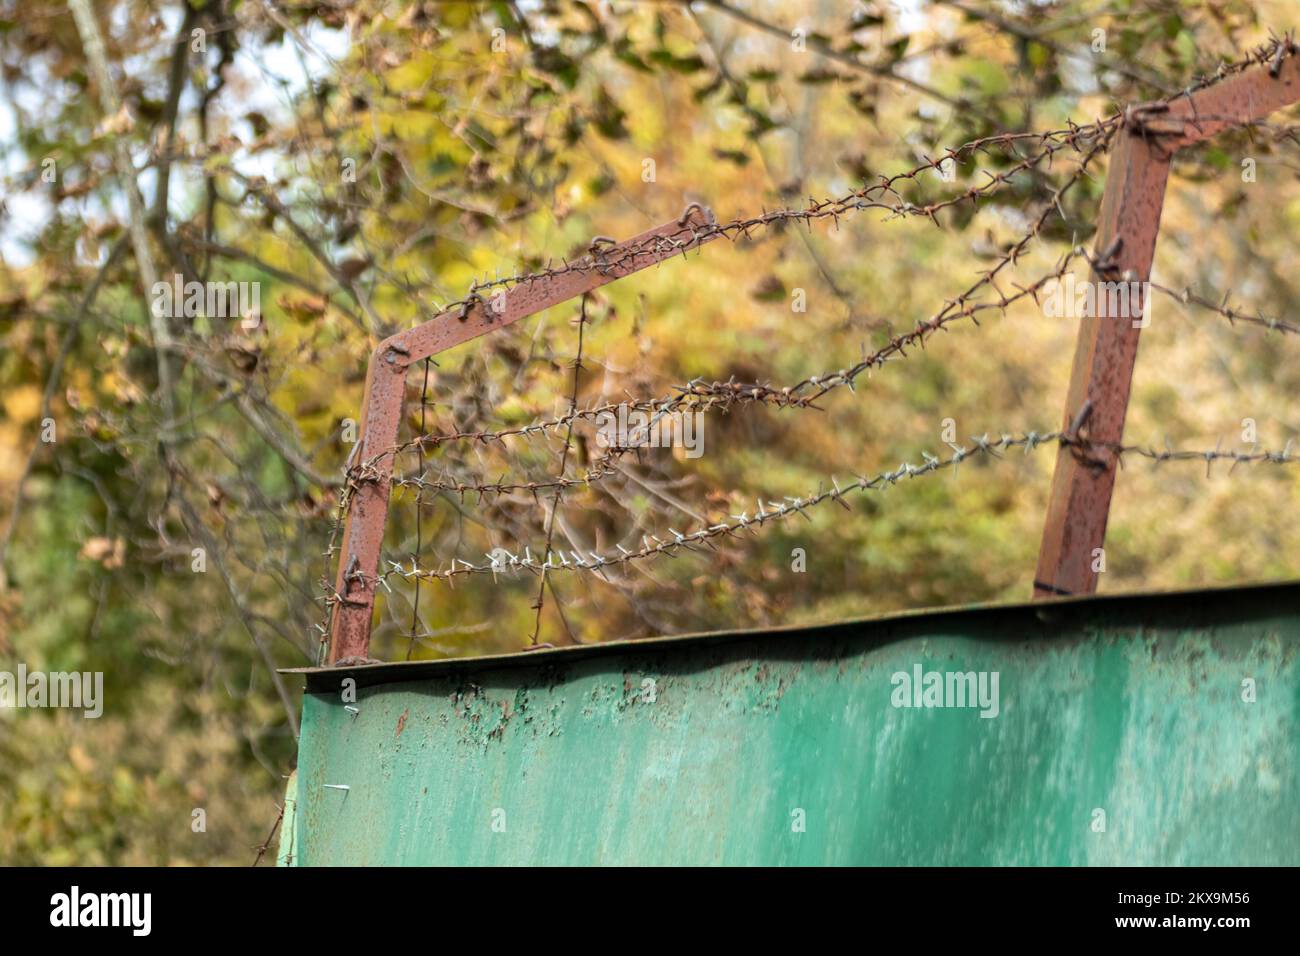 Green metal rusty fence with barbed wire on top with greenery, tree branches background. Territory border protection Stock Photo